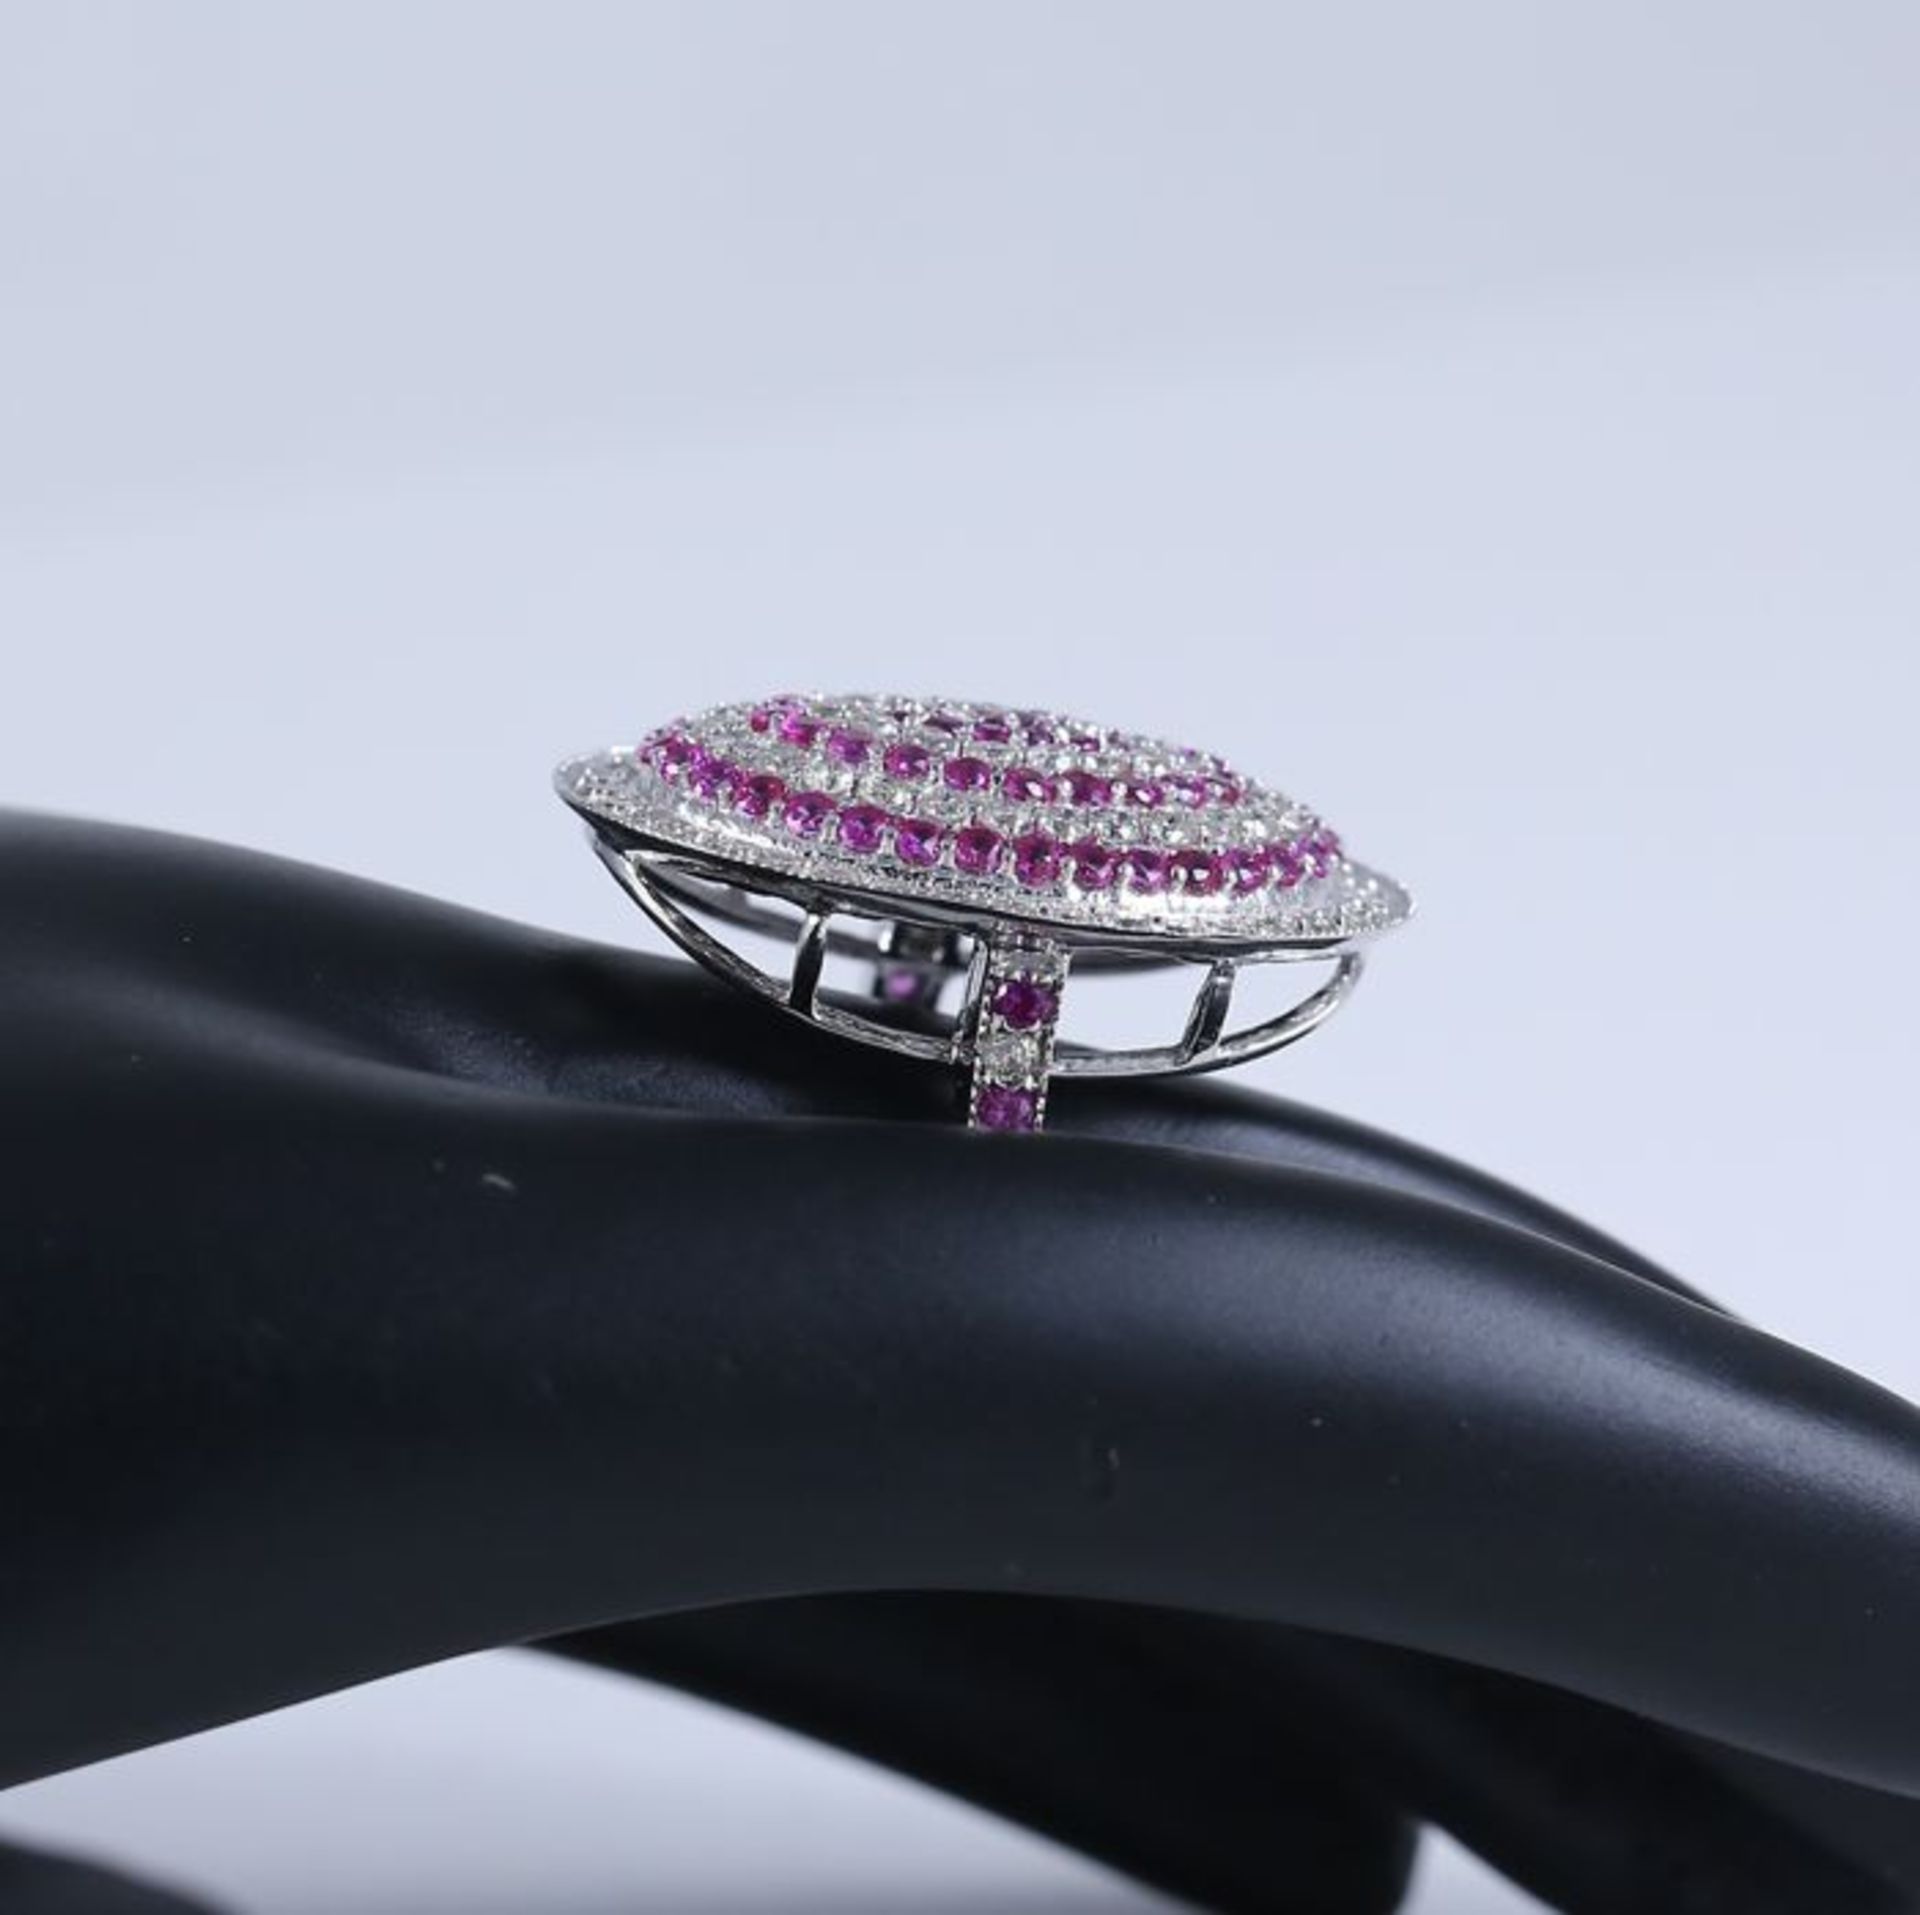 14 K / 585 Very Exclusive White Gold Diamond and Ruby Ring - Image 8 of 10